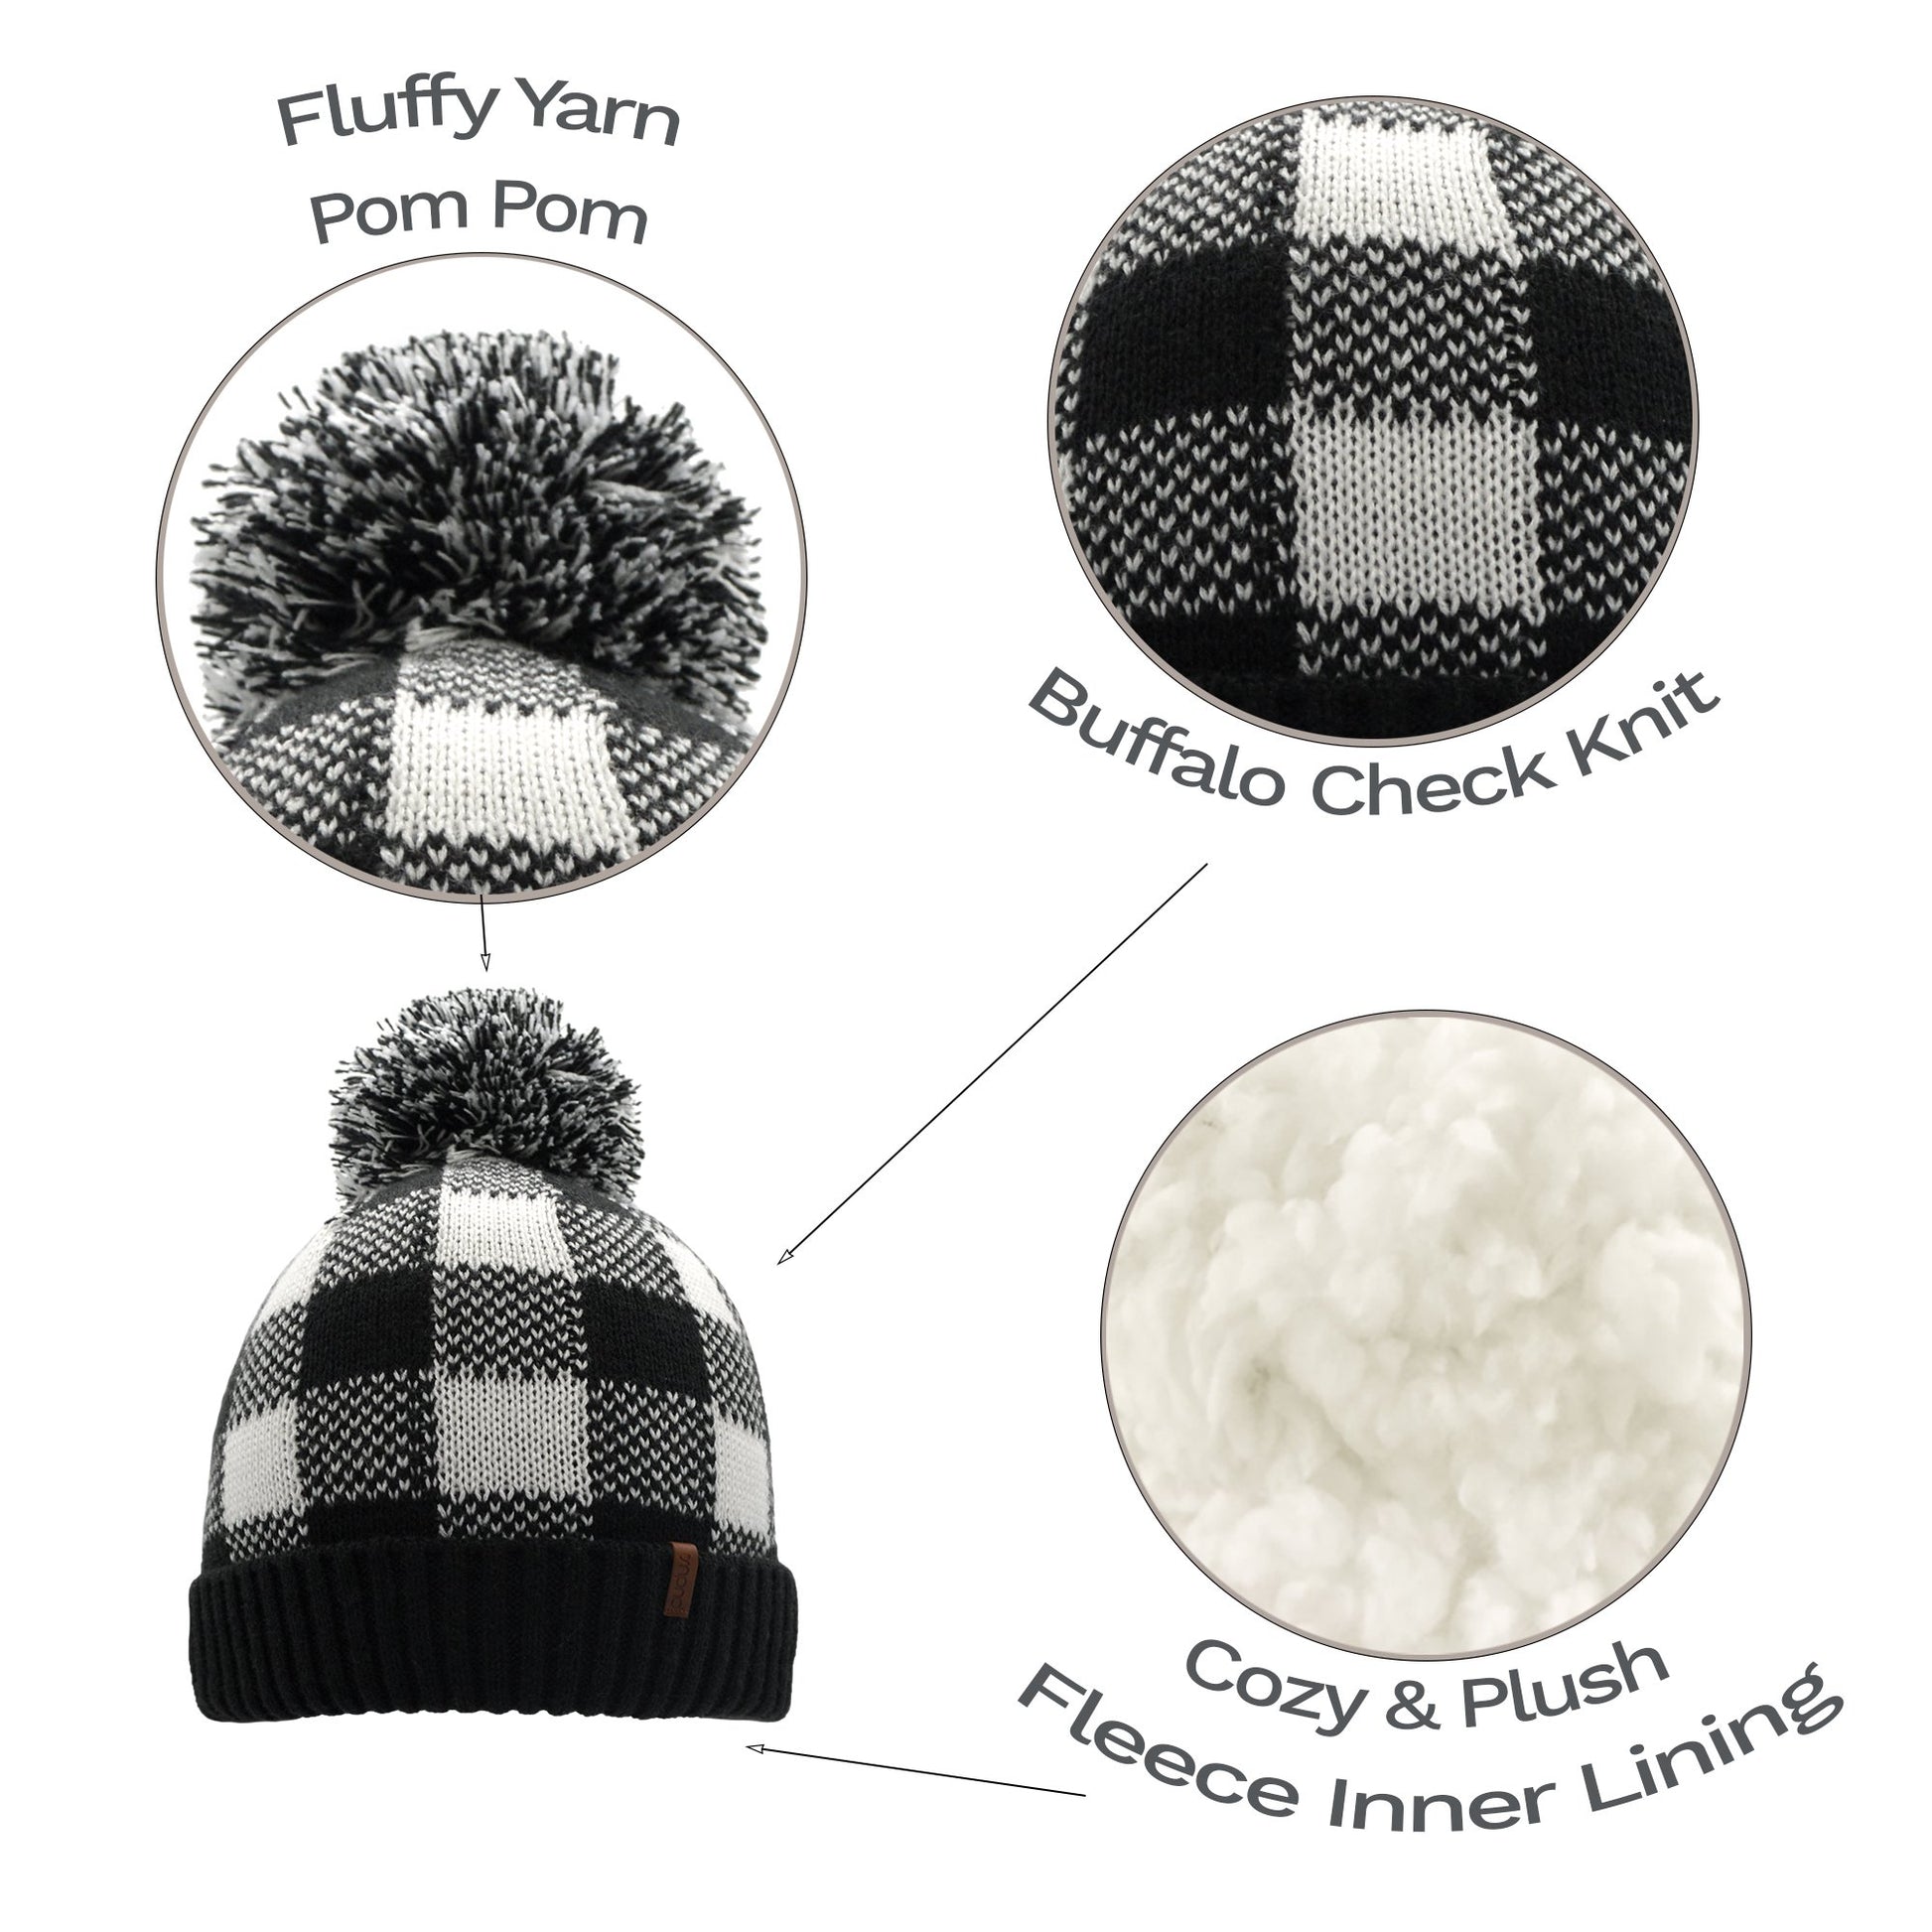 Get your LV hat and scarf sets ready for winter